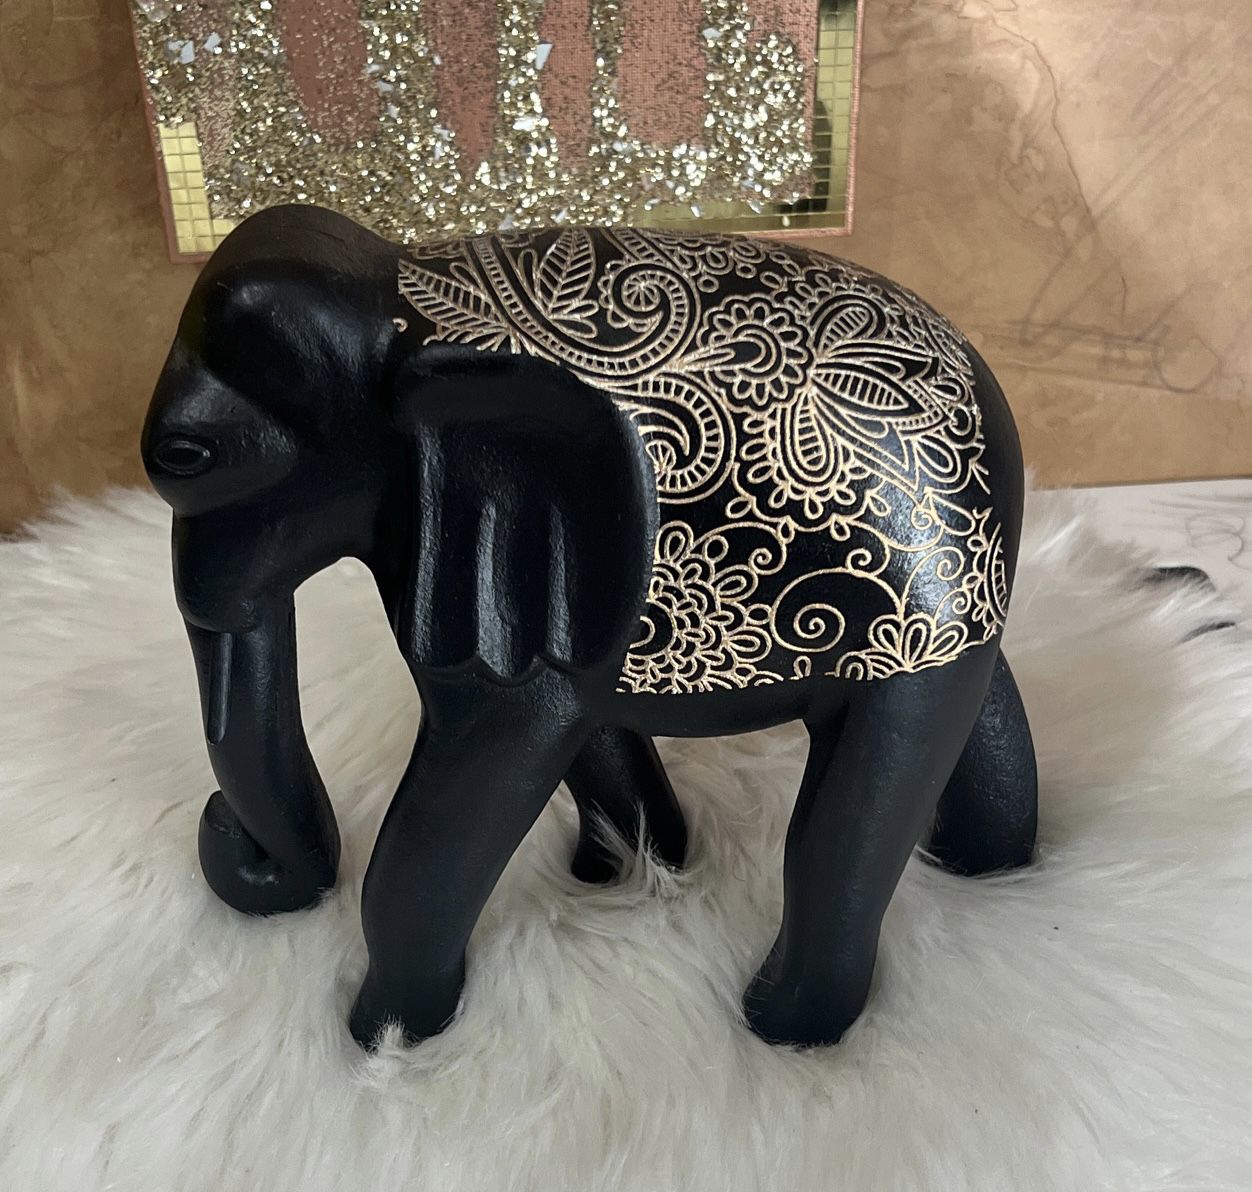 Elephant Figure Statue with Gold Flowers Design -Majestic indian elephant